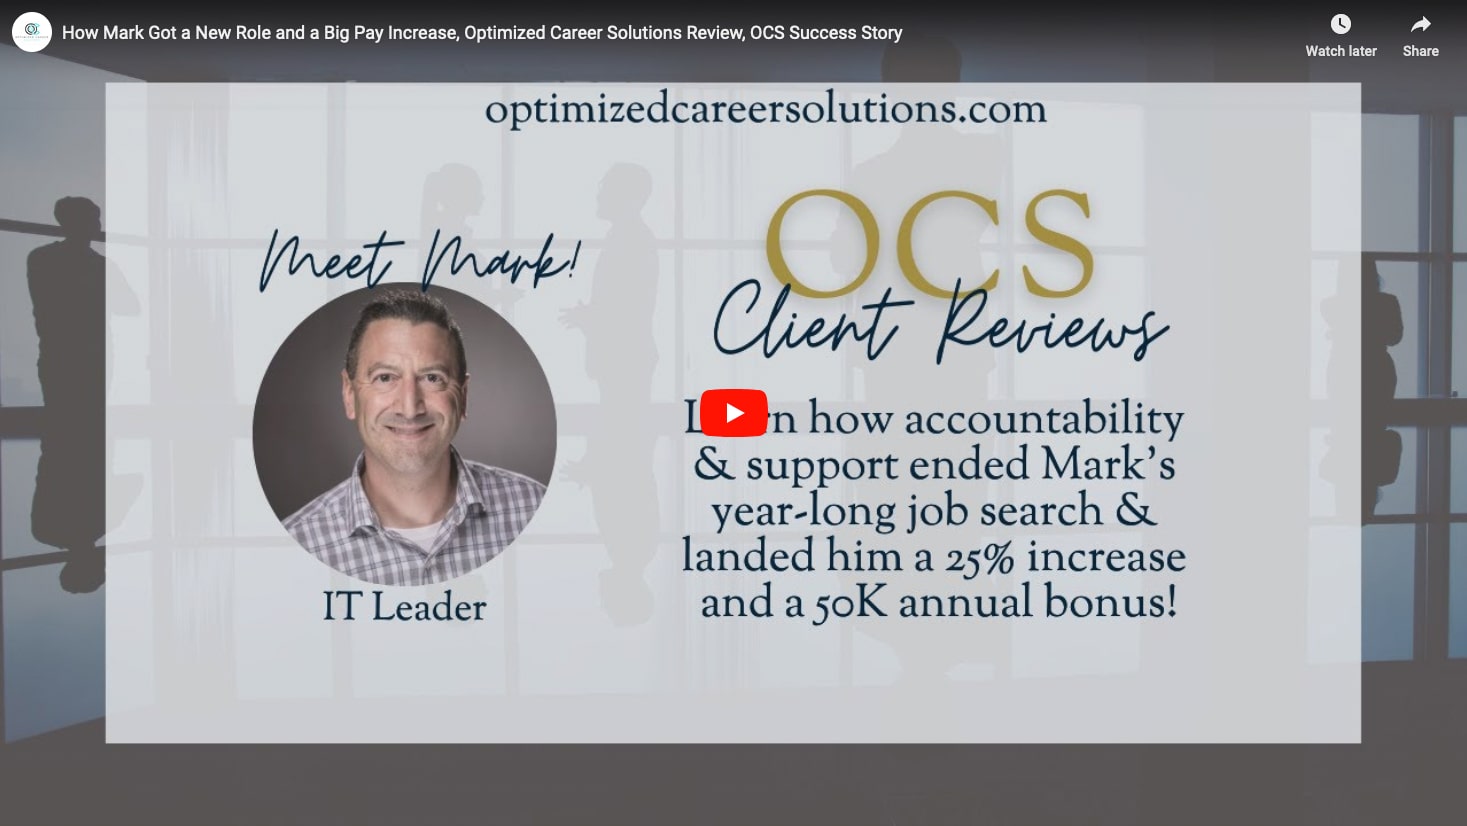 How Mark Got a New Role and a Big Pay Increase, Optimized Career Solutions Review, OCS Success Story